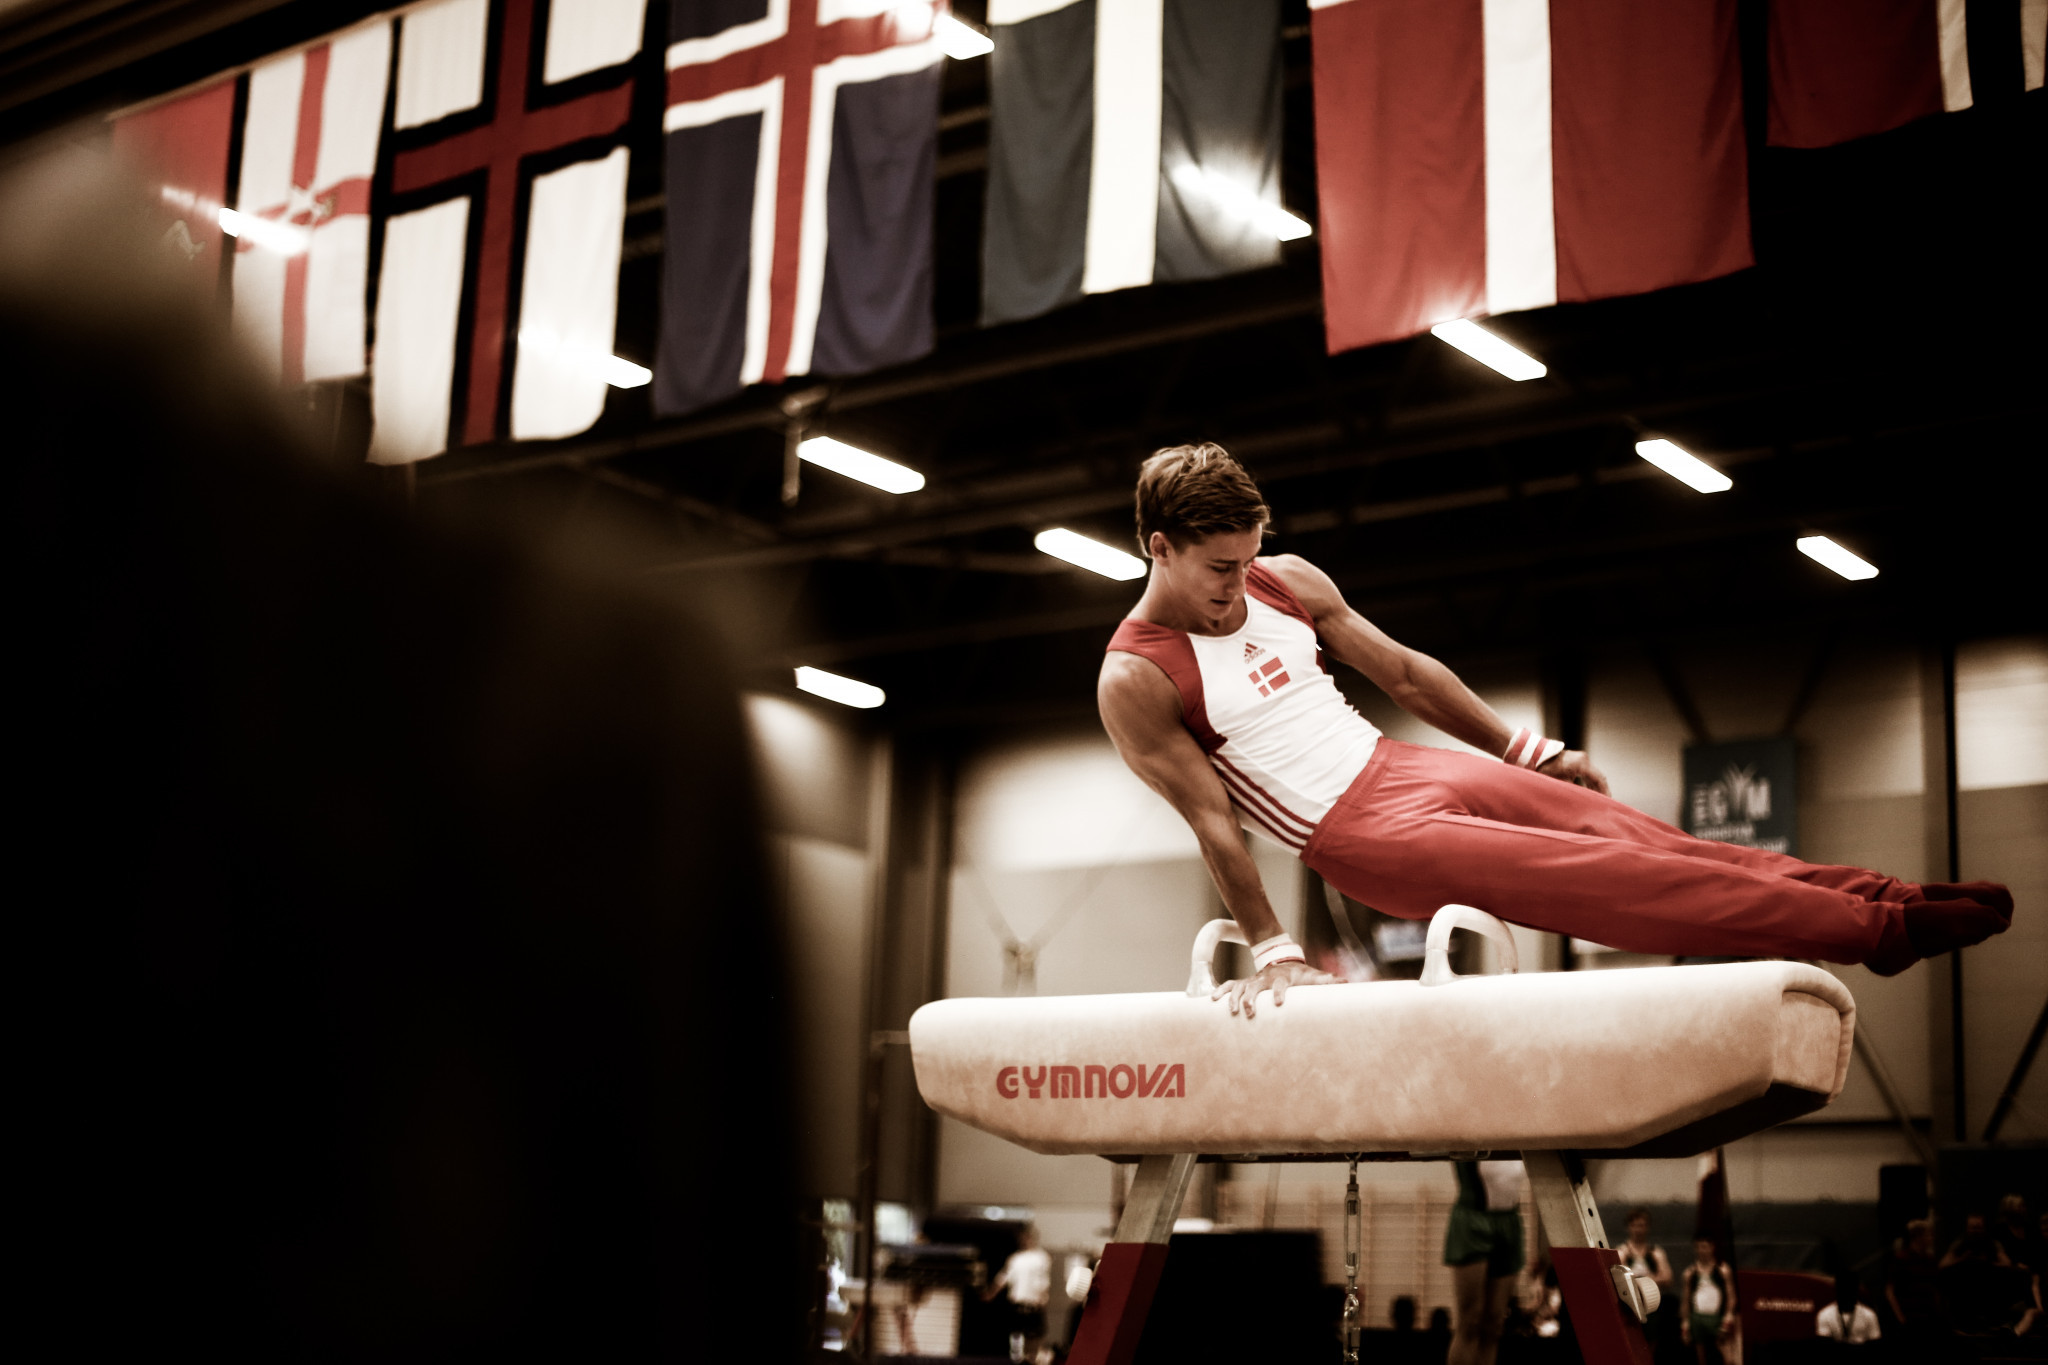 The news is a huge boost for Danish gymnastics ©Sport Event Denmark